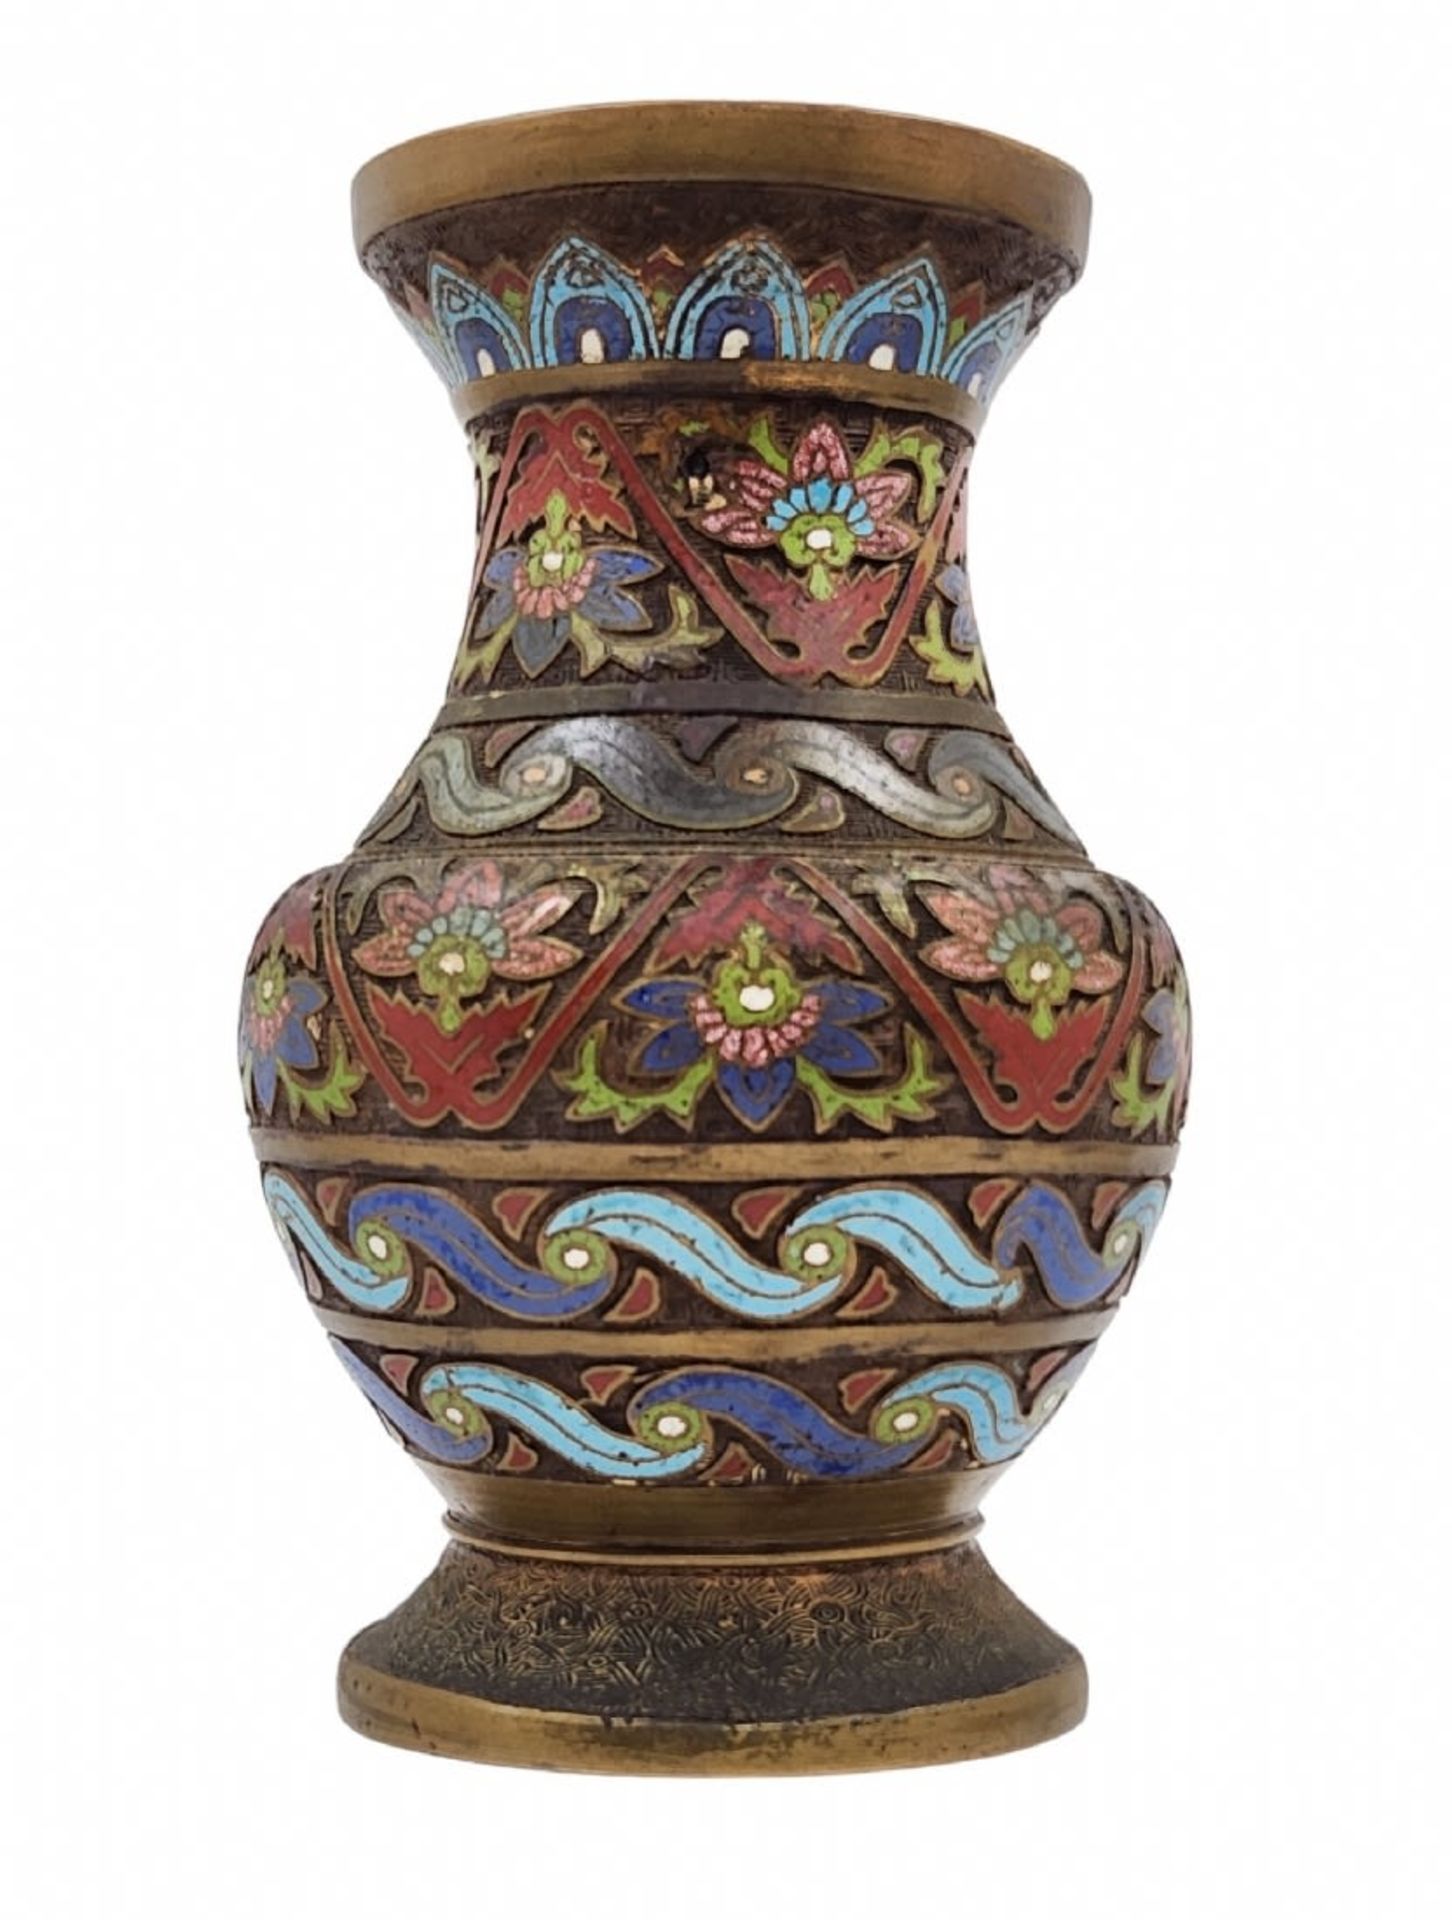 An antique Chinese urn from the 19th century, the urn is made of bronze and 'Champleve' enamel, - Bild 3 aus 7